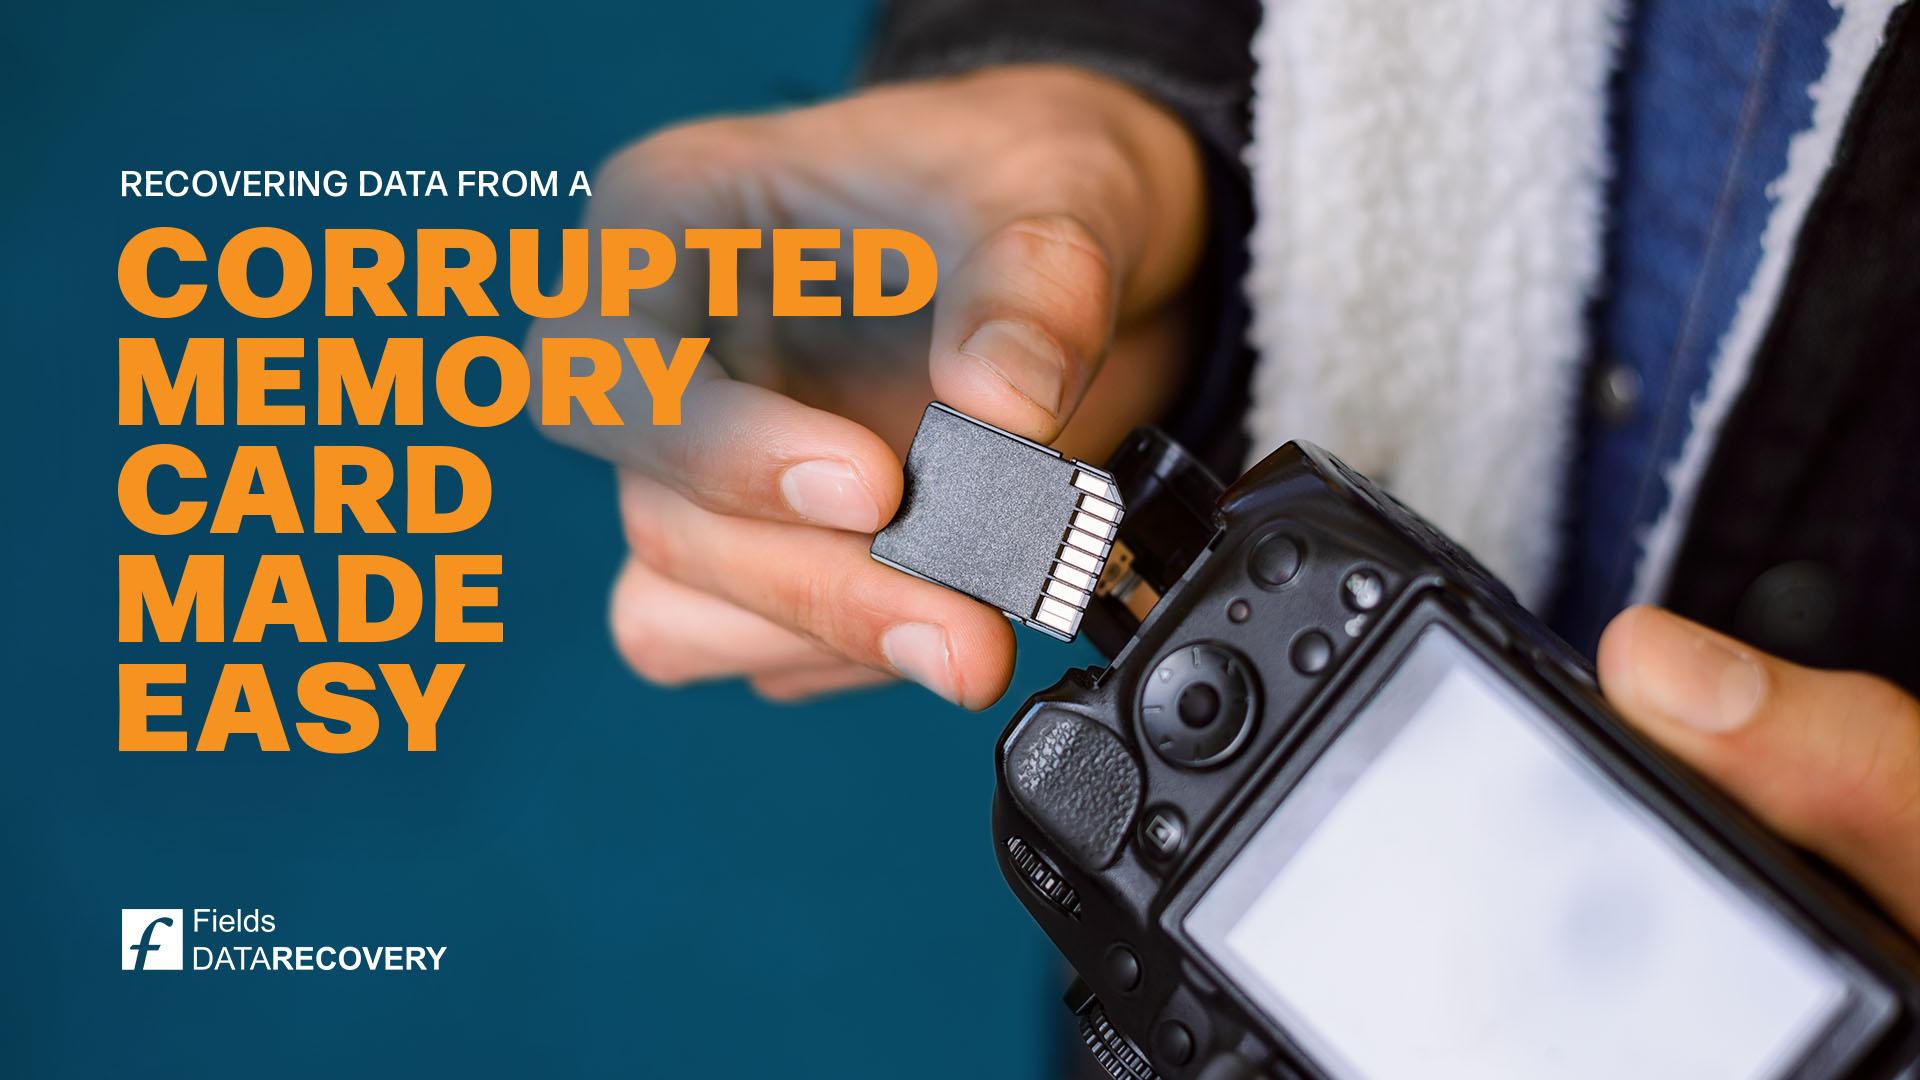 Recovering Data from a Corrupted Memory Card Made Easy